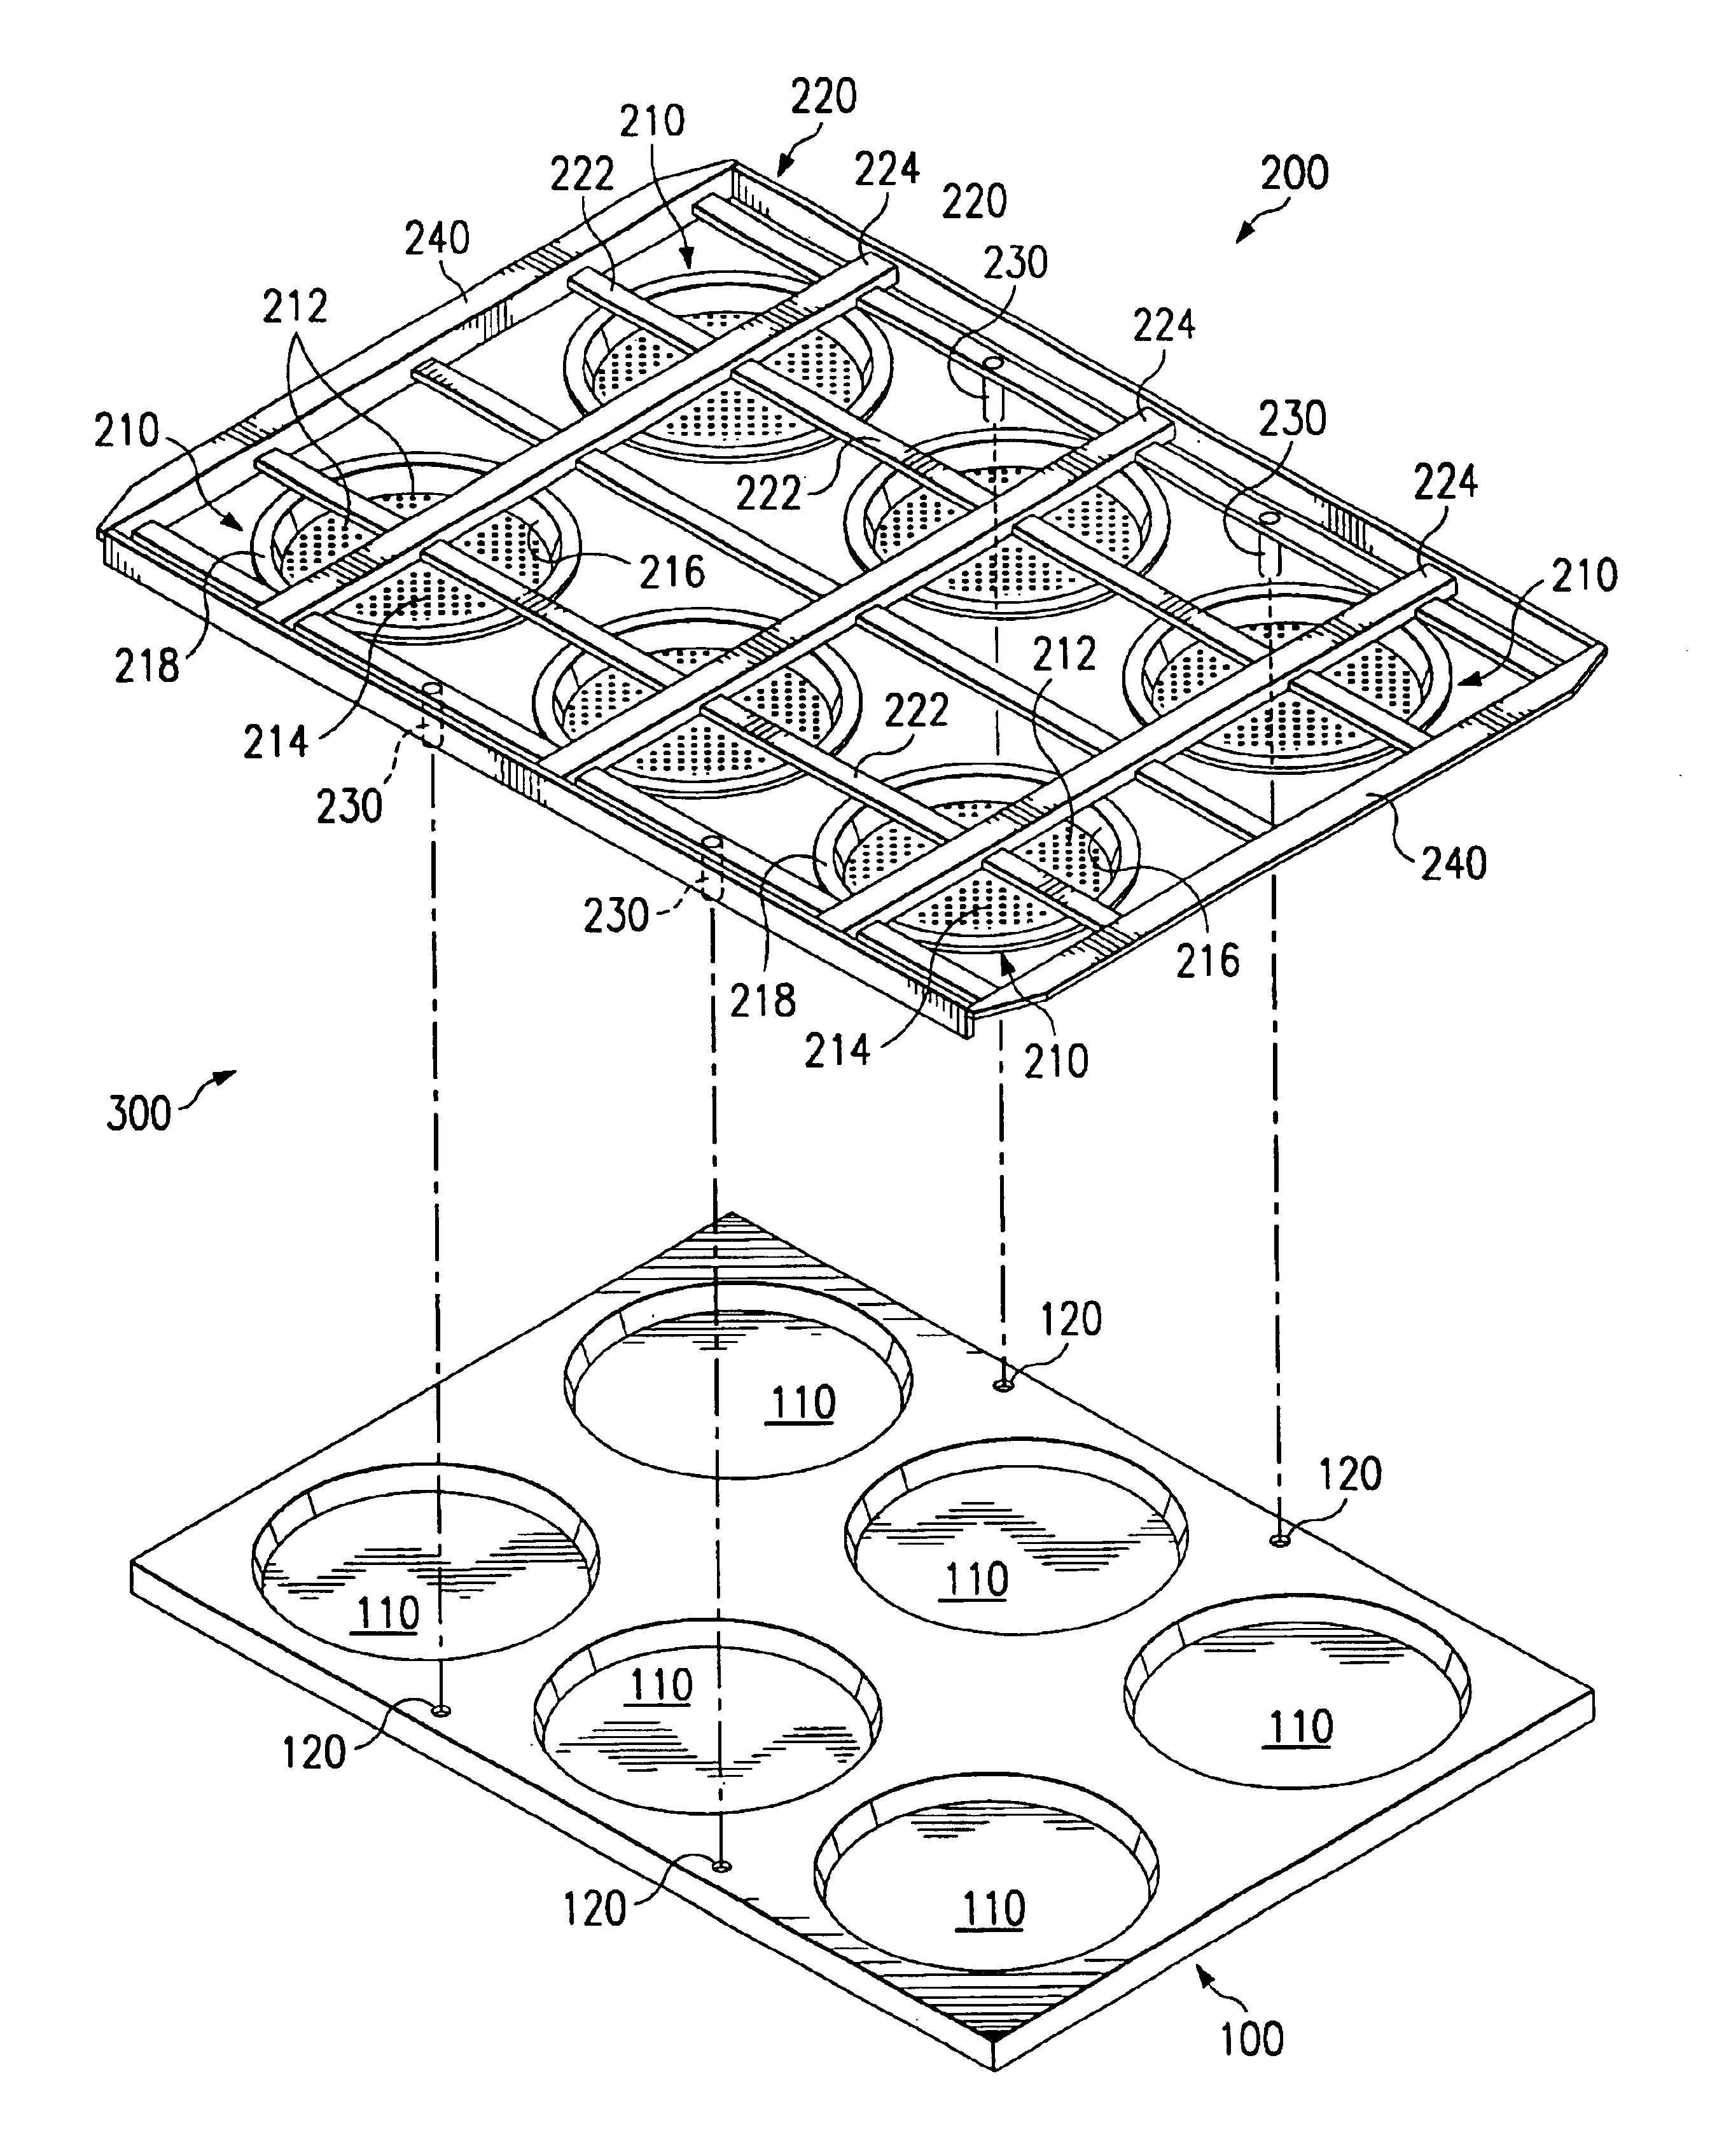 System and method for producing par-baked pizza crusts